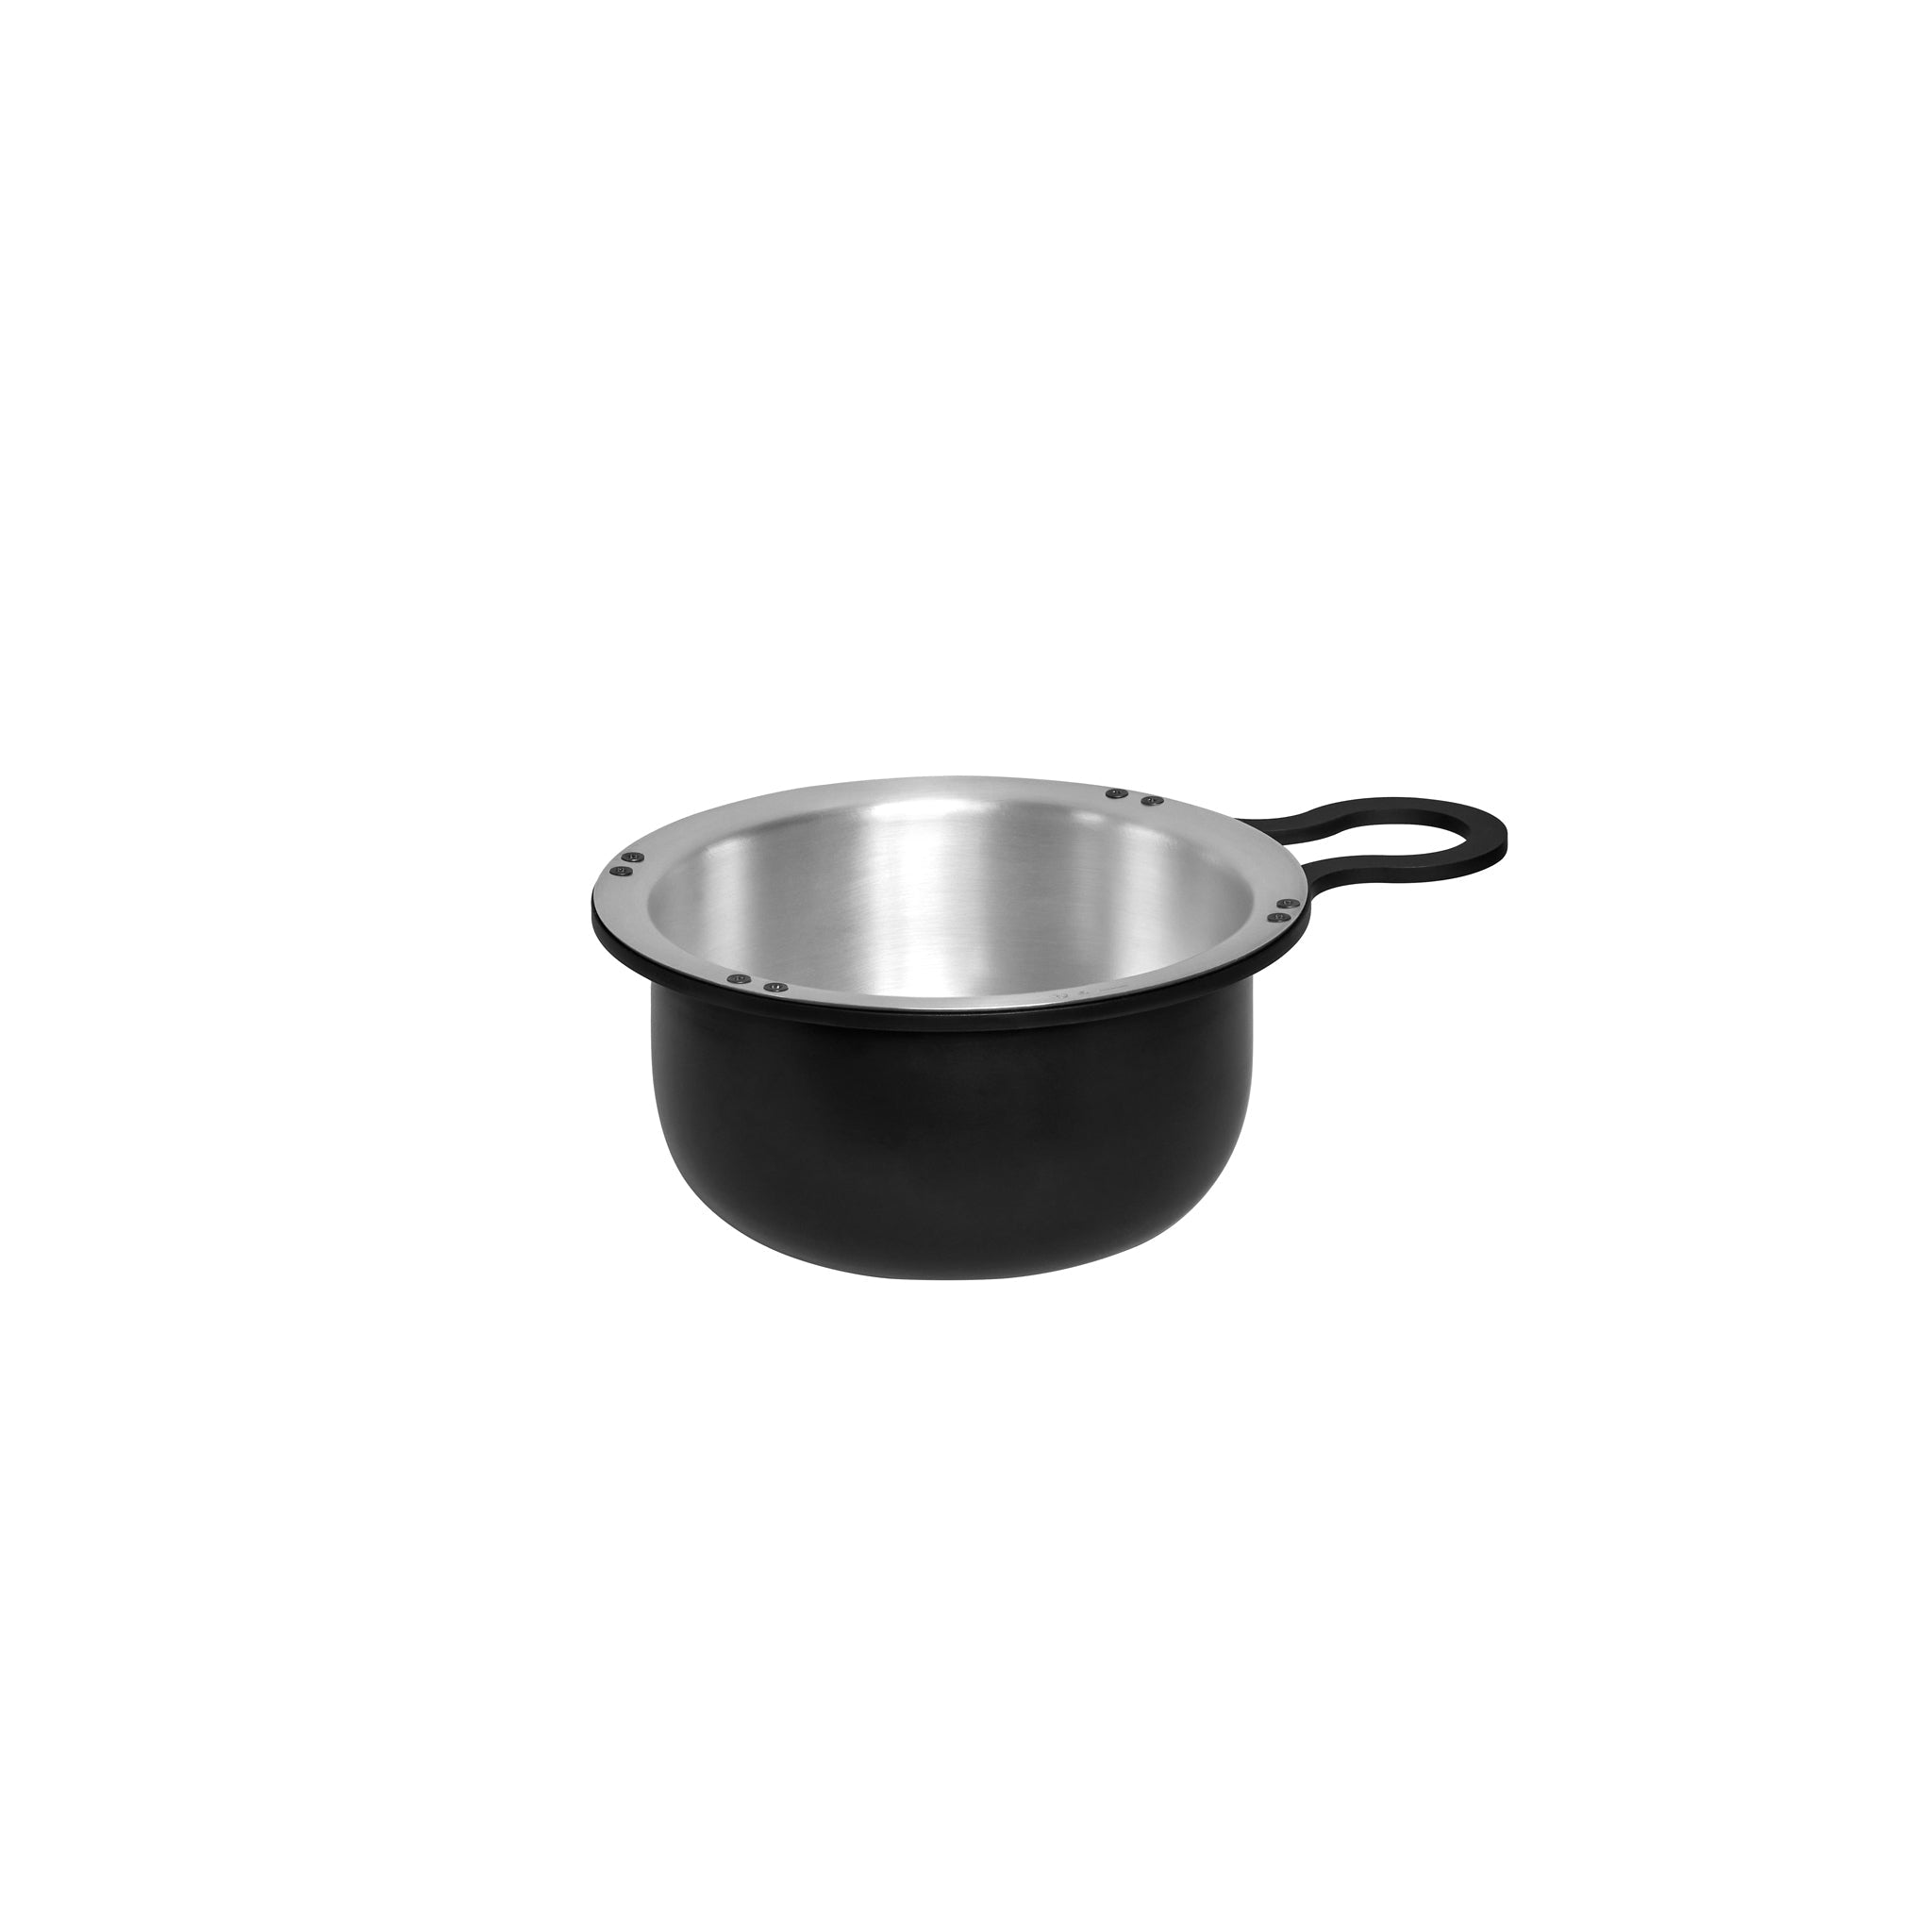 An amazing small saucepan made of iron with a pure silver coating